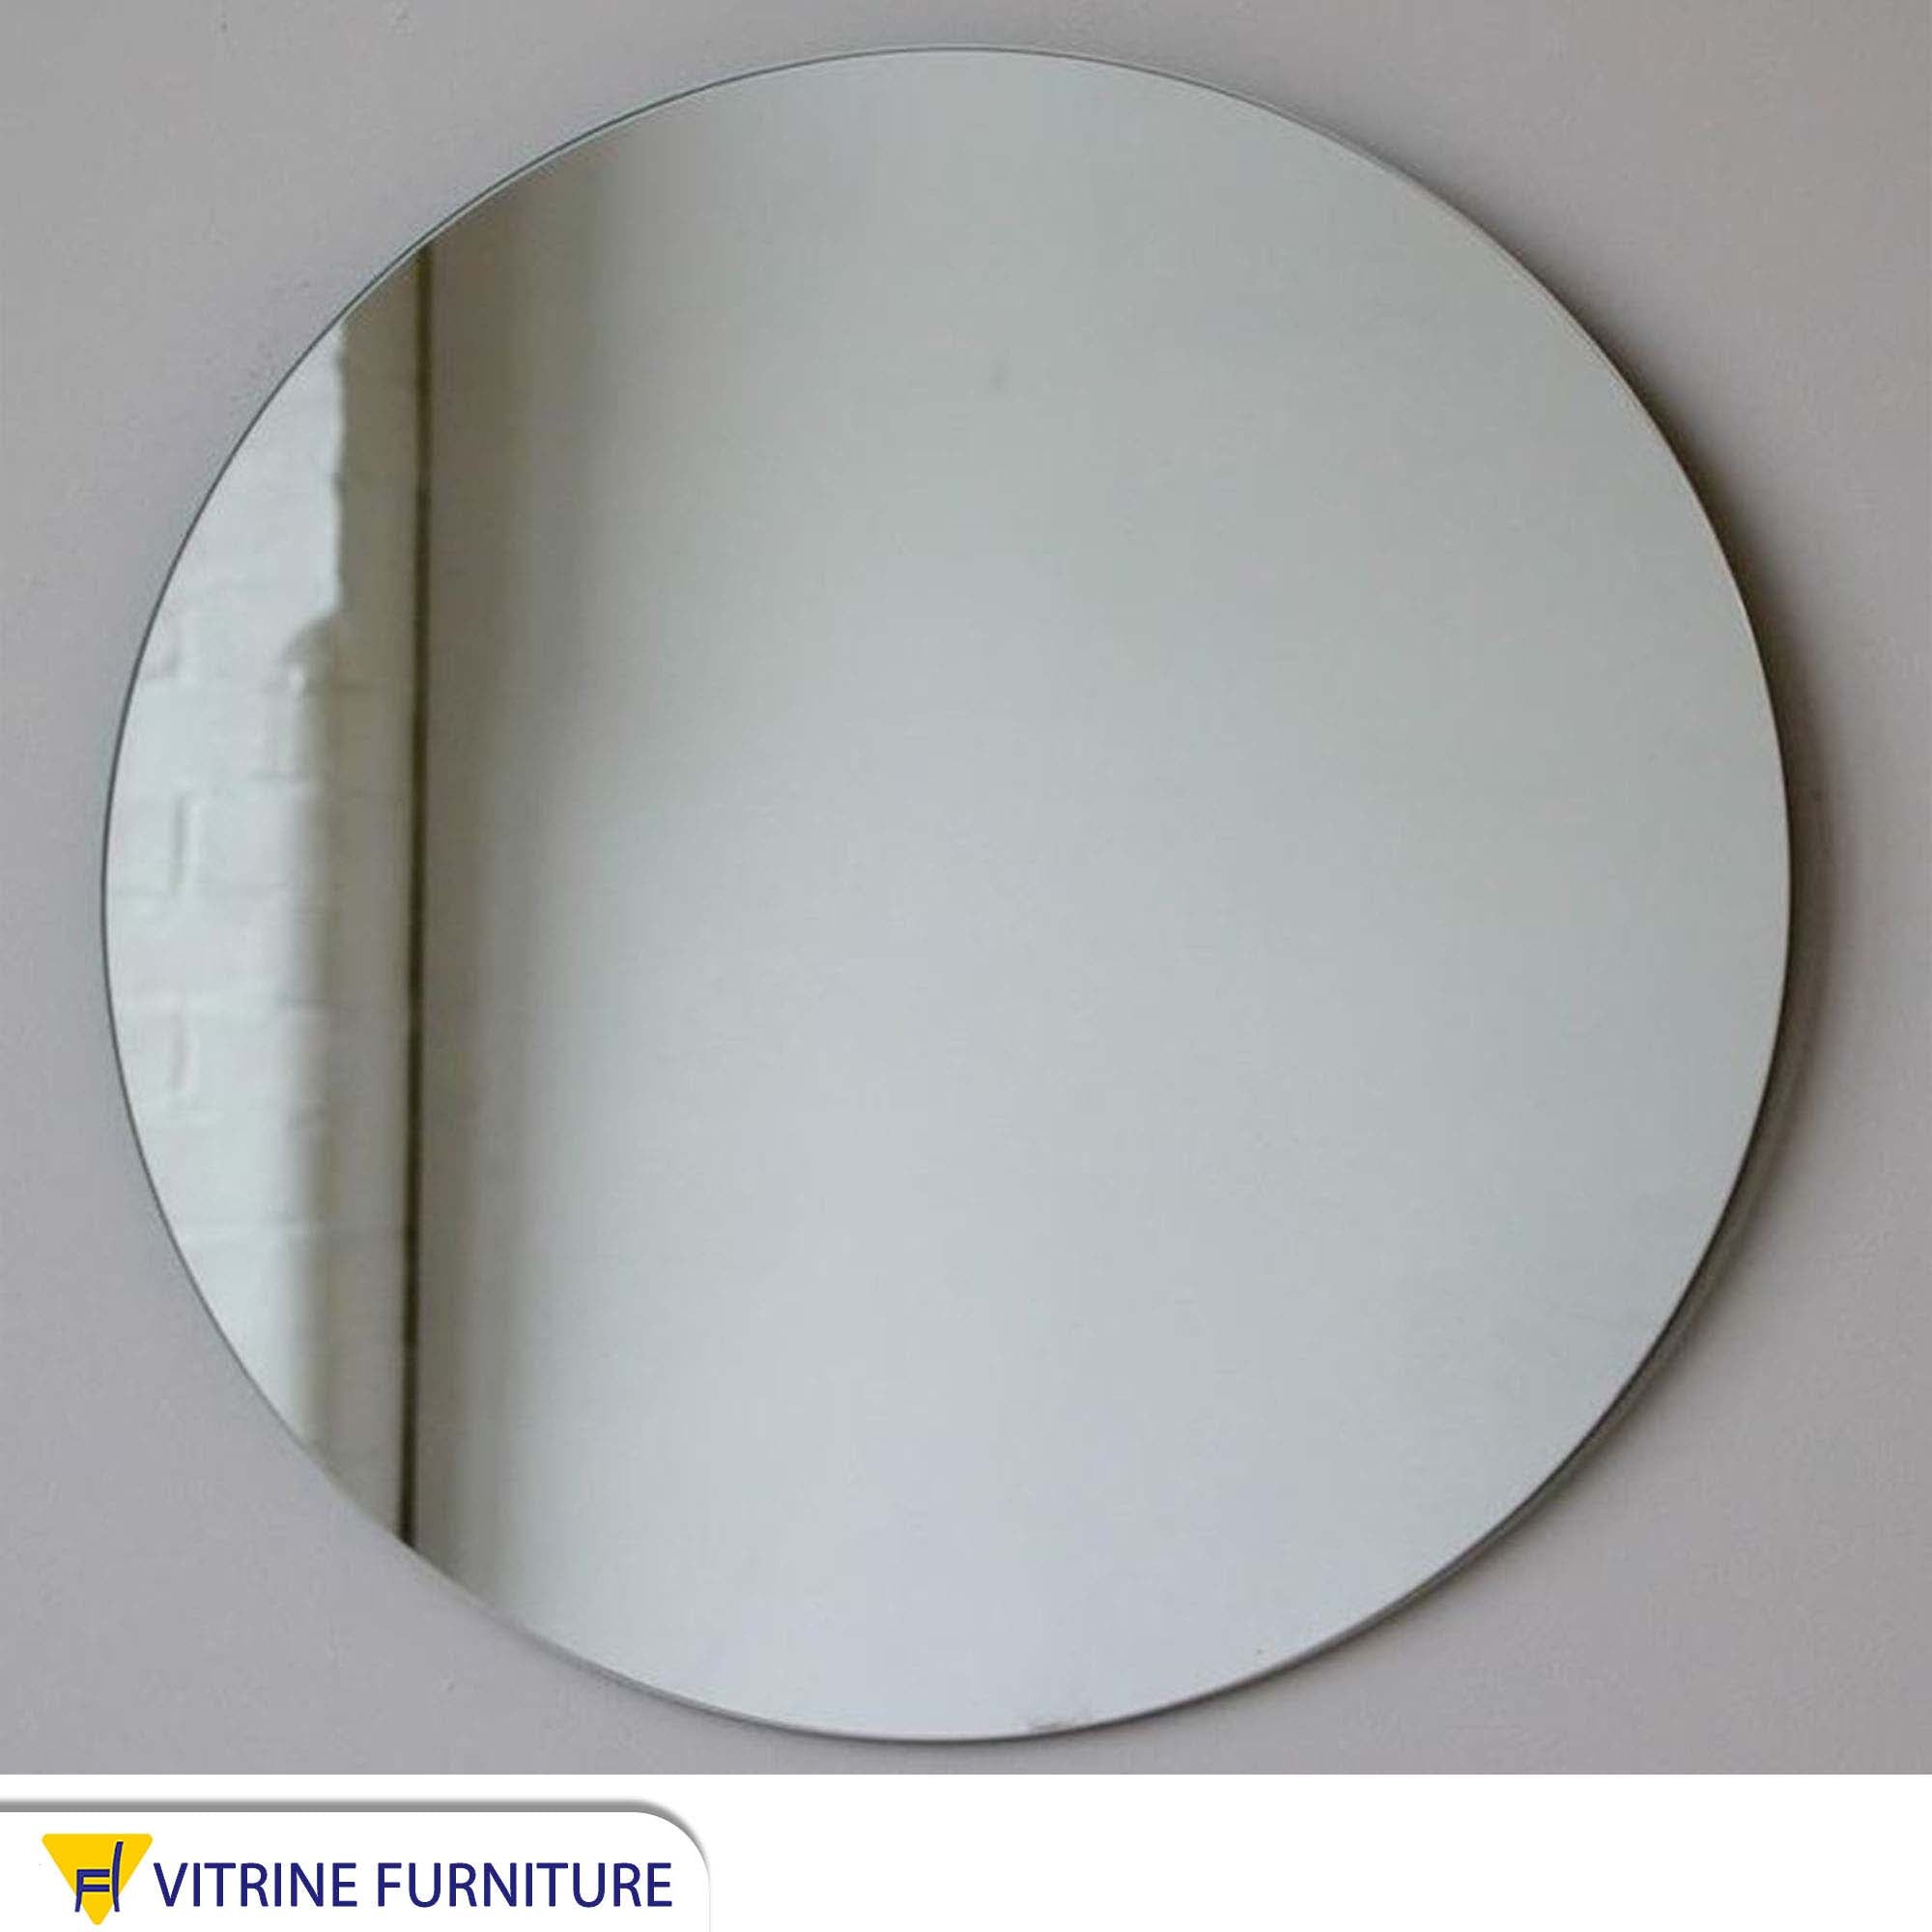 Round mirror without frame